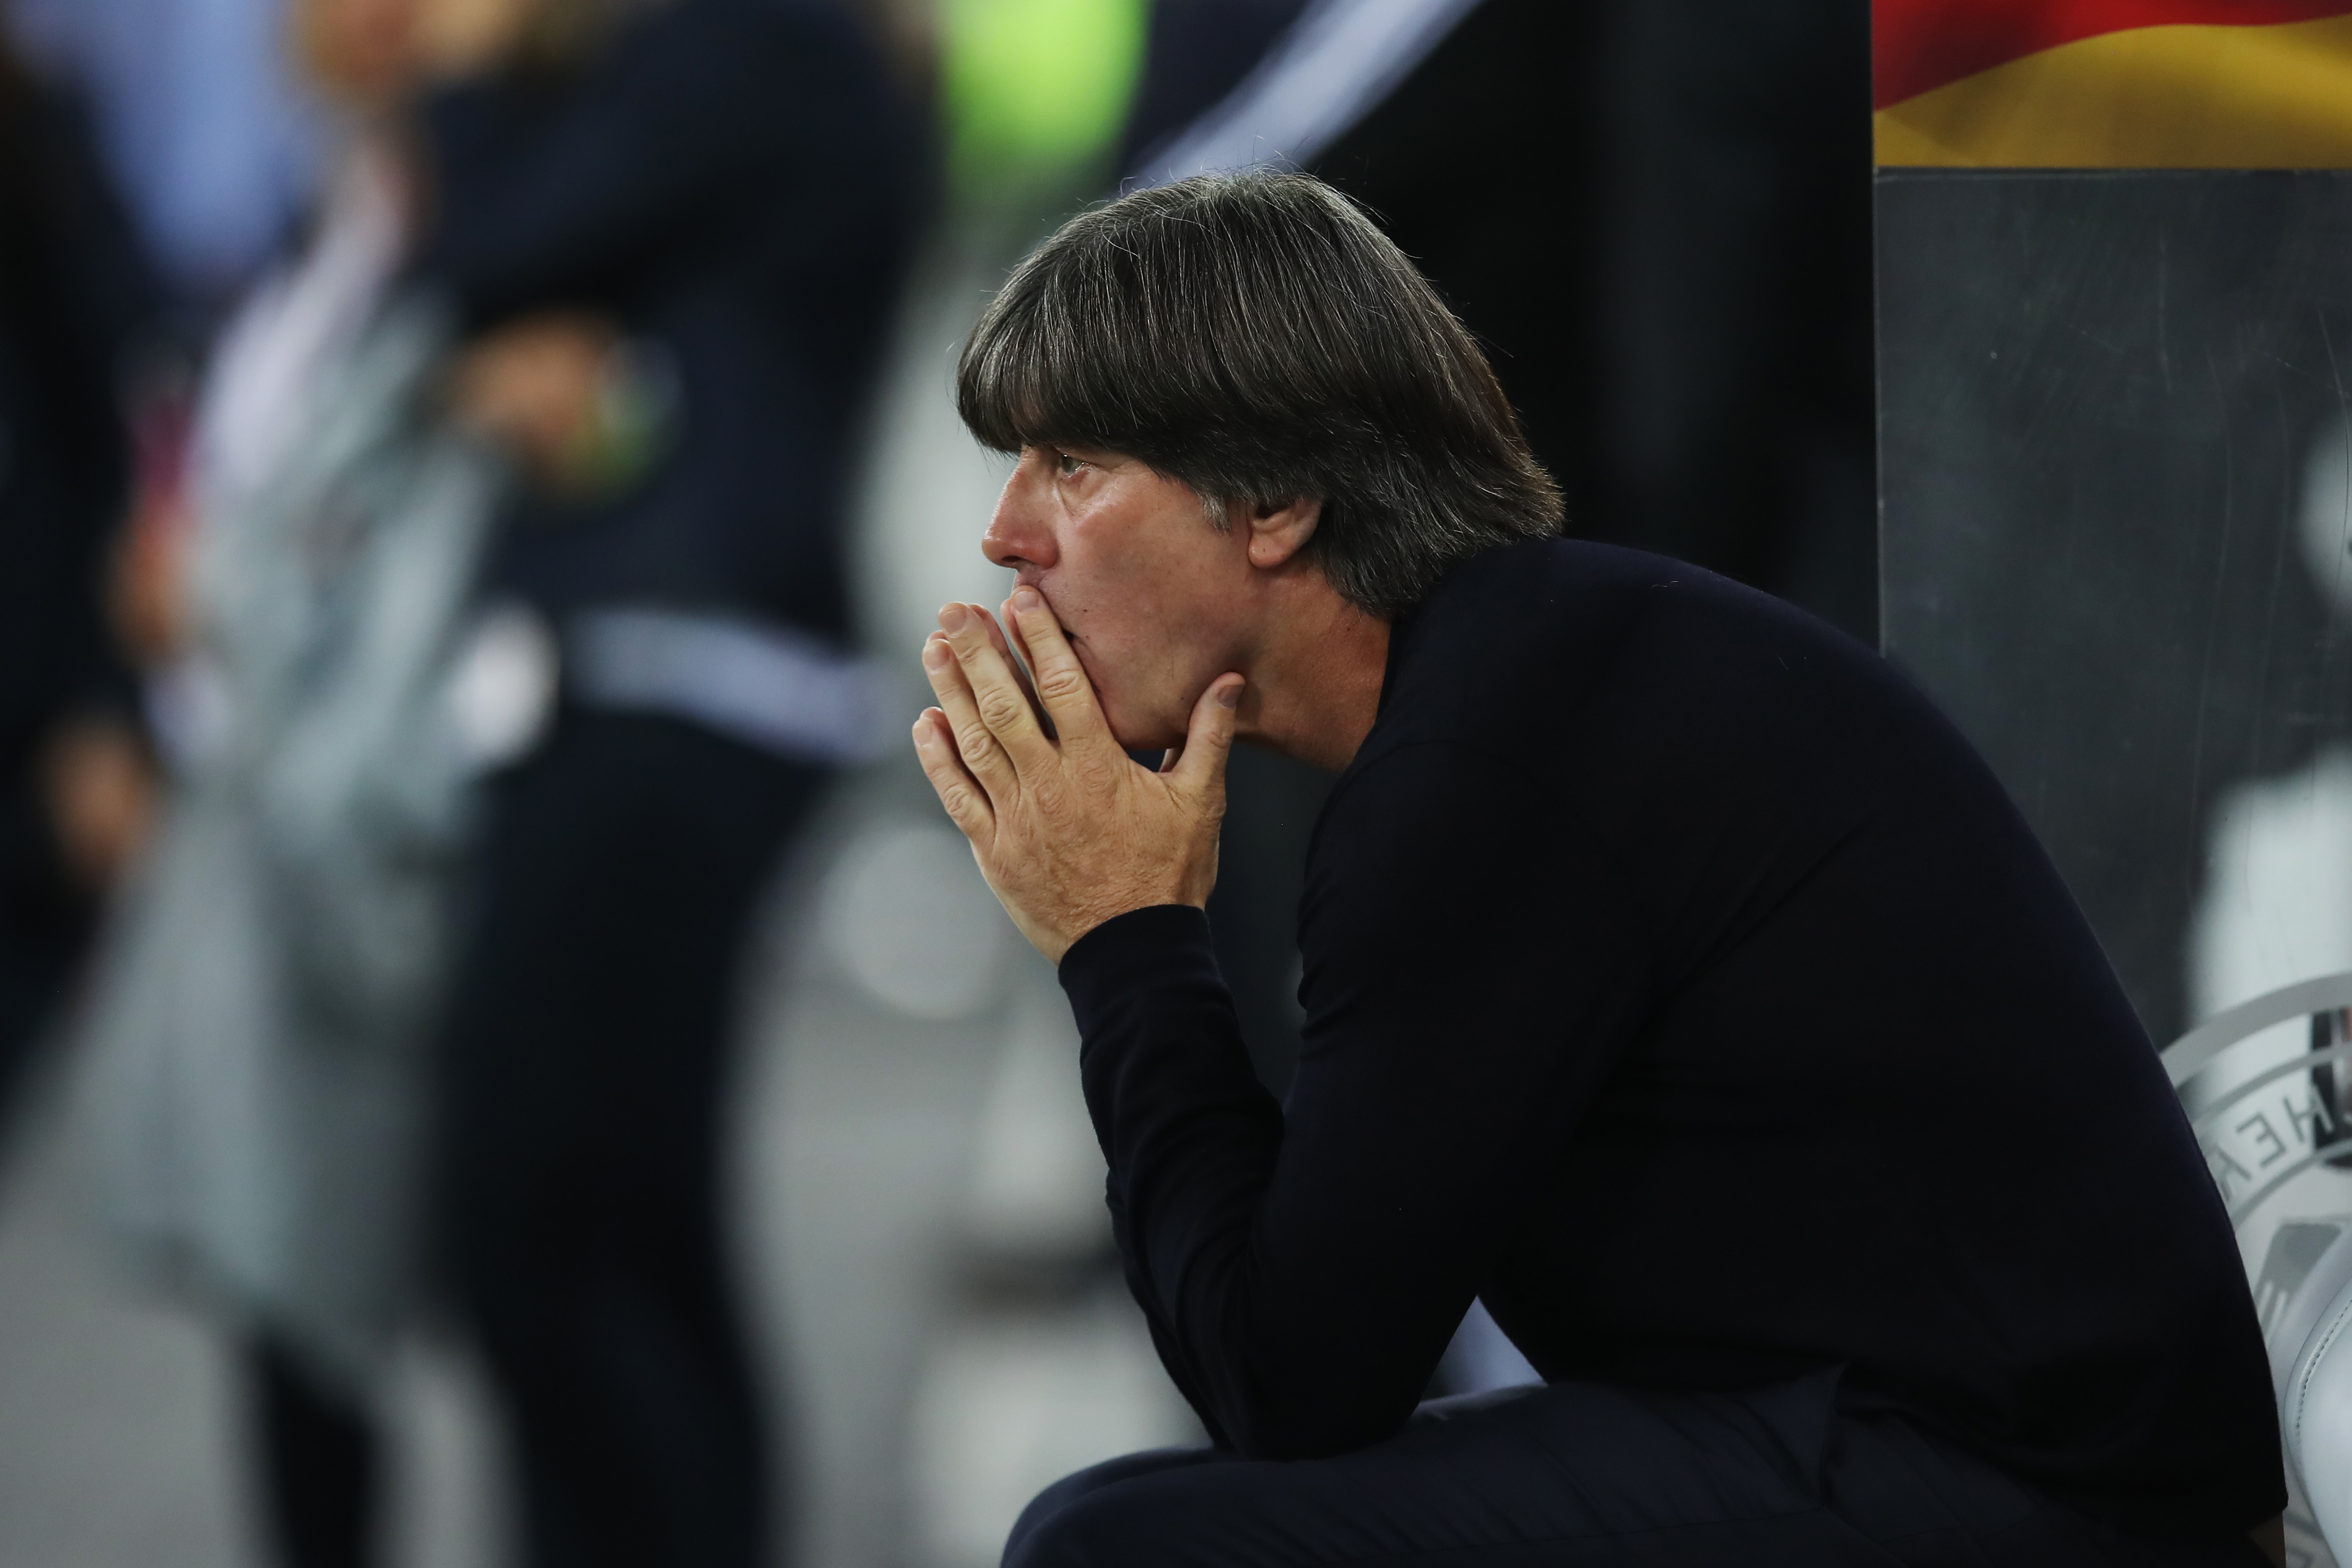 HAMBURG, GERMANY - SEPTEMBER 06: Head coach Joachim Loew of Germany looks on prior to the UEFA Euro 2020 qualifier match between Germany and Netherlands at Volksparkstadion on September 06, 2019 in Hamburg, Germany. (Photo by Alex Grimm/Bongarts/Getty Images)